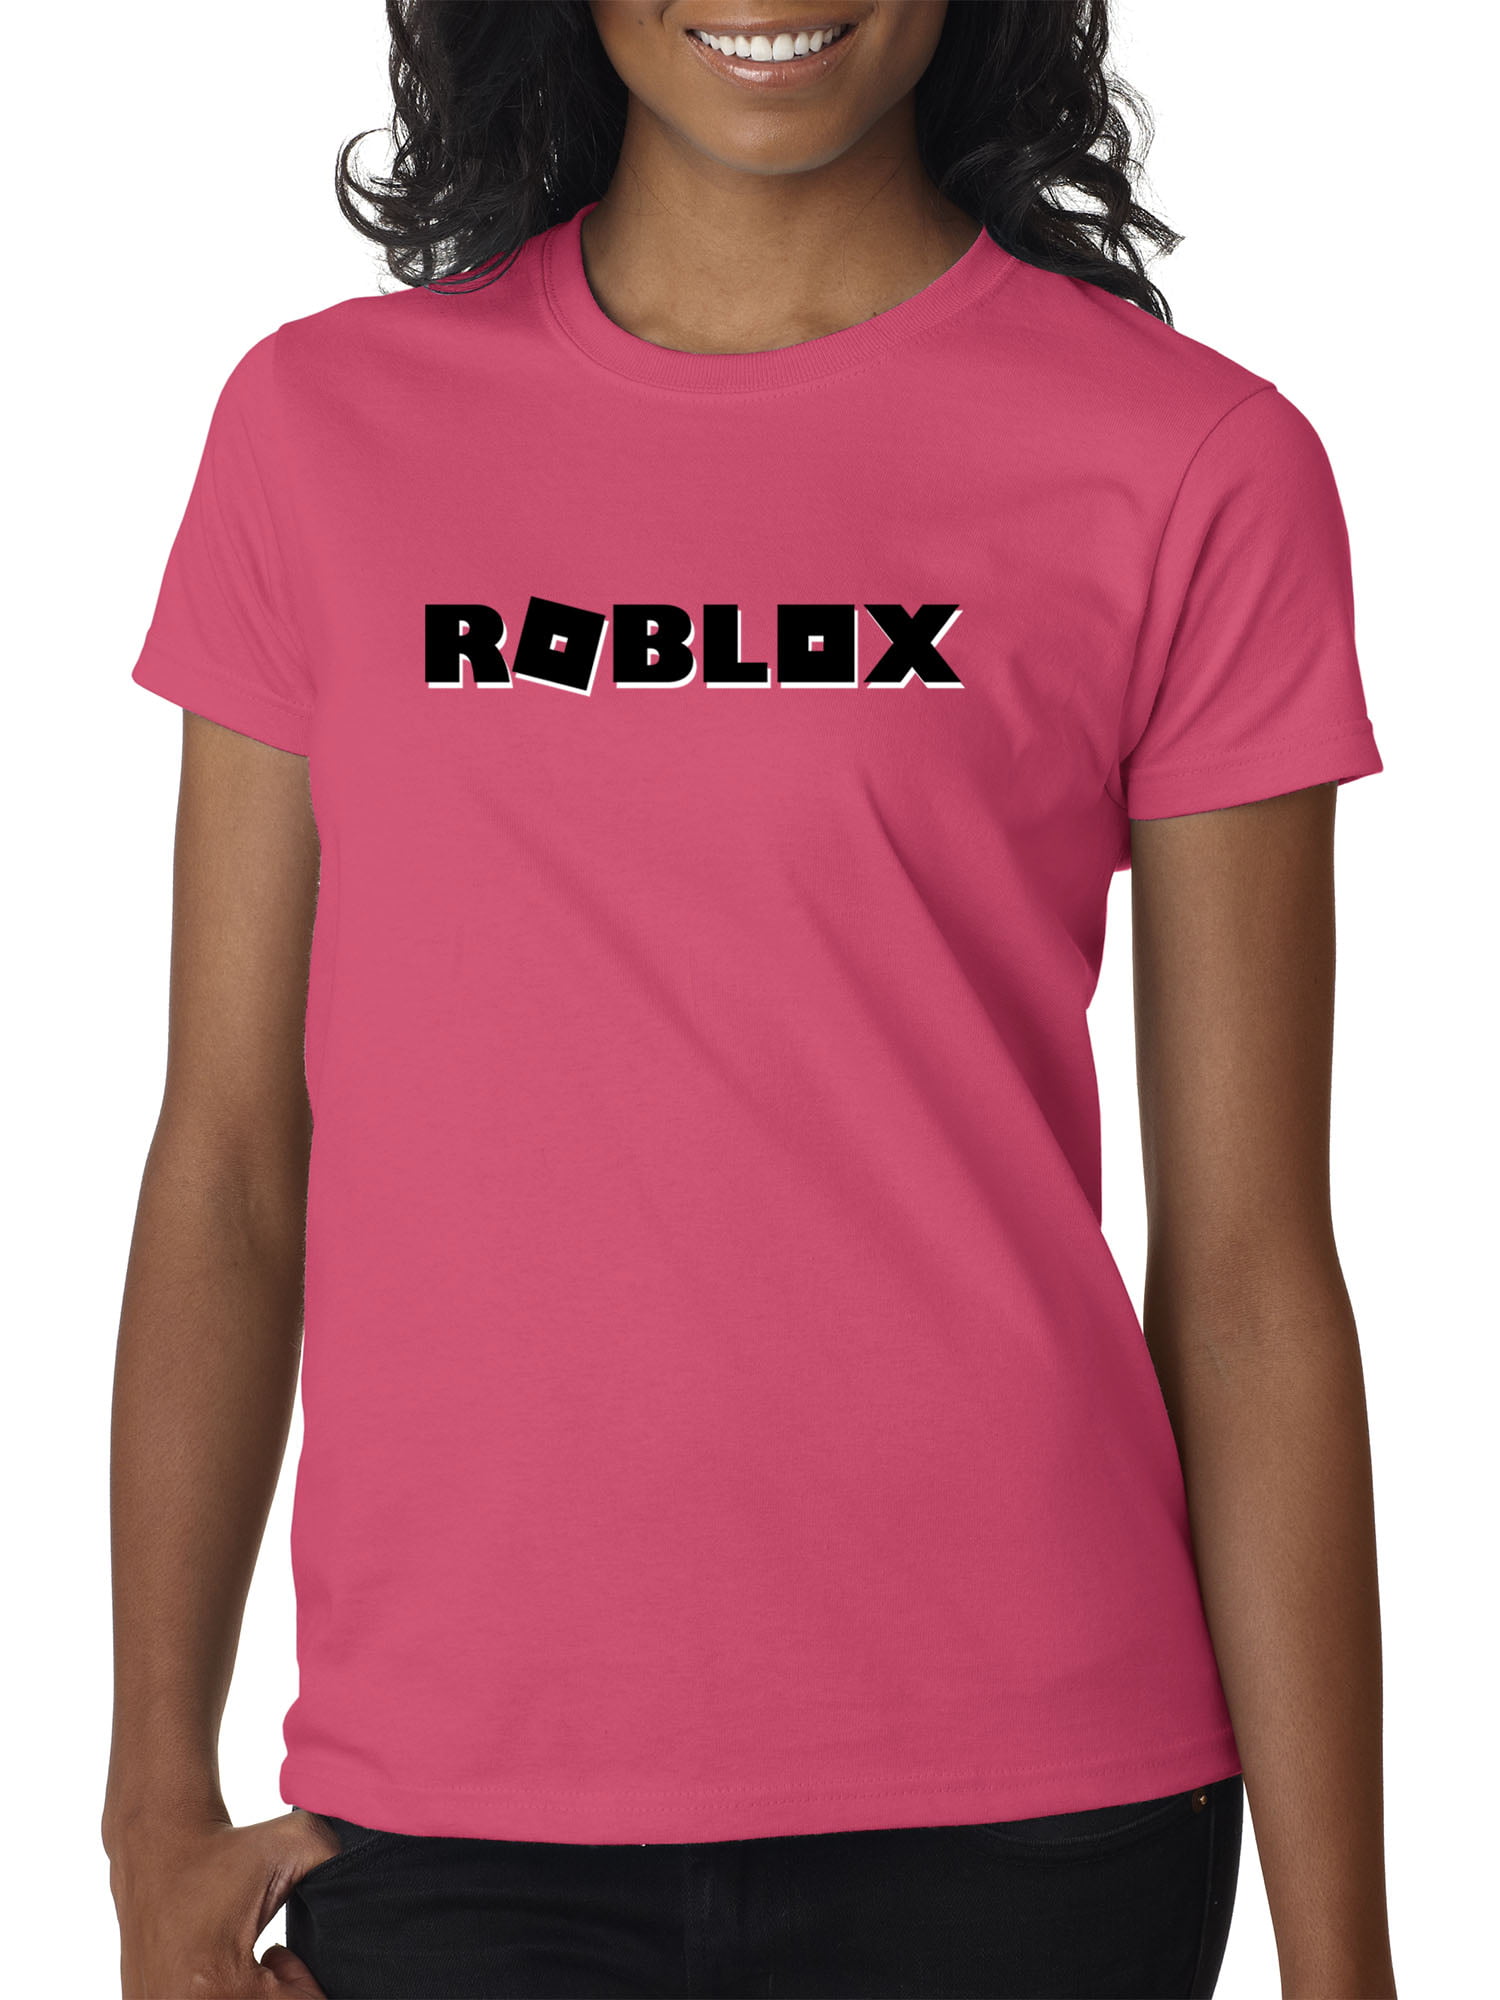 New Way New Way 1168 Women S T Shirt Roblox Block Logo Game Accent Small Heliconia Walmart Com Walmart Com - roblox clothes walmart com